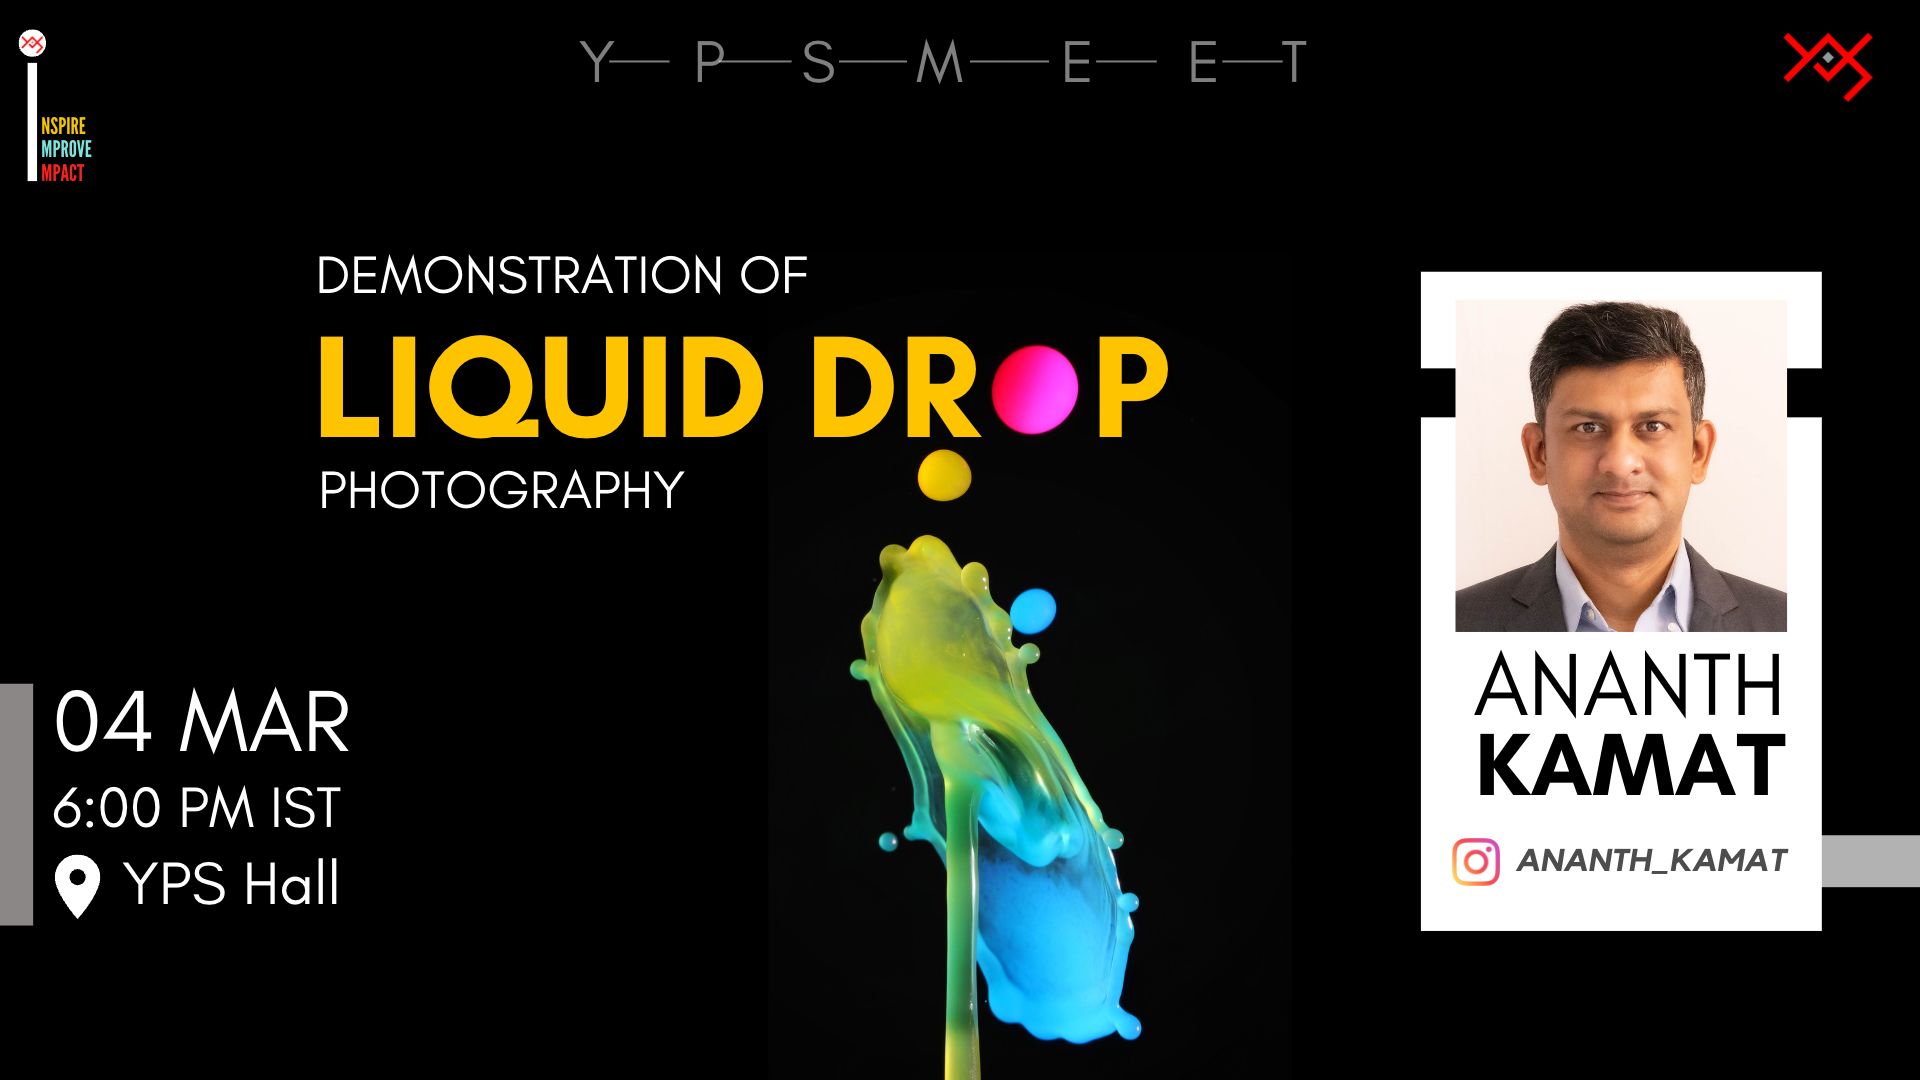 Liquid Drop Photography by Ananth Kamat